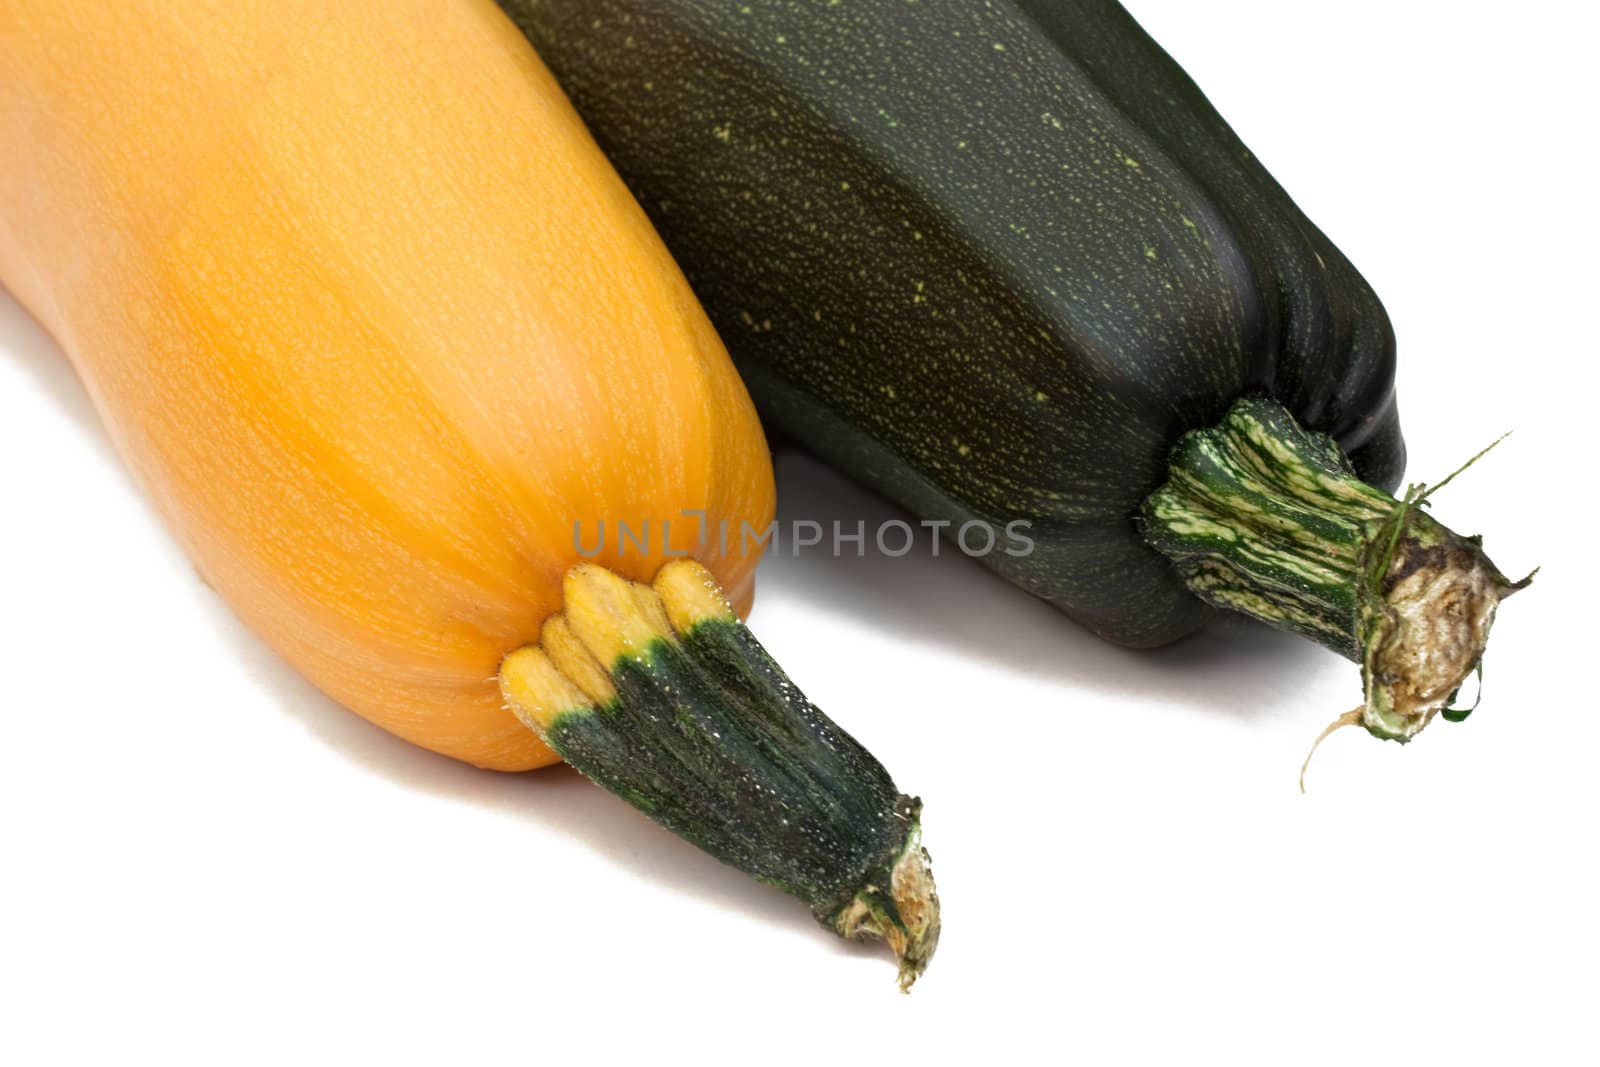 Vegetable marrow and pumpkin isolated on white